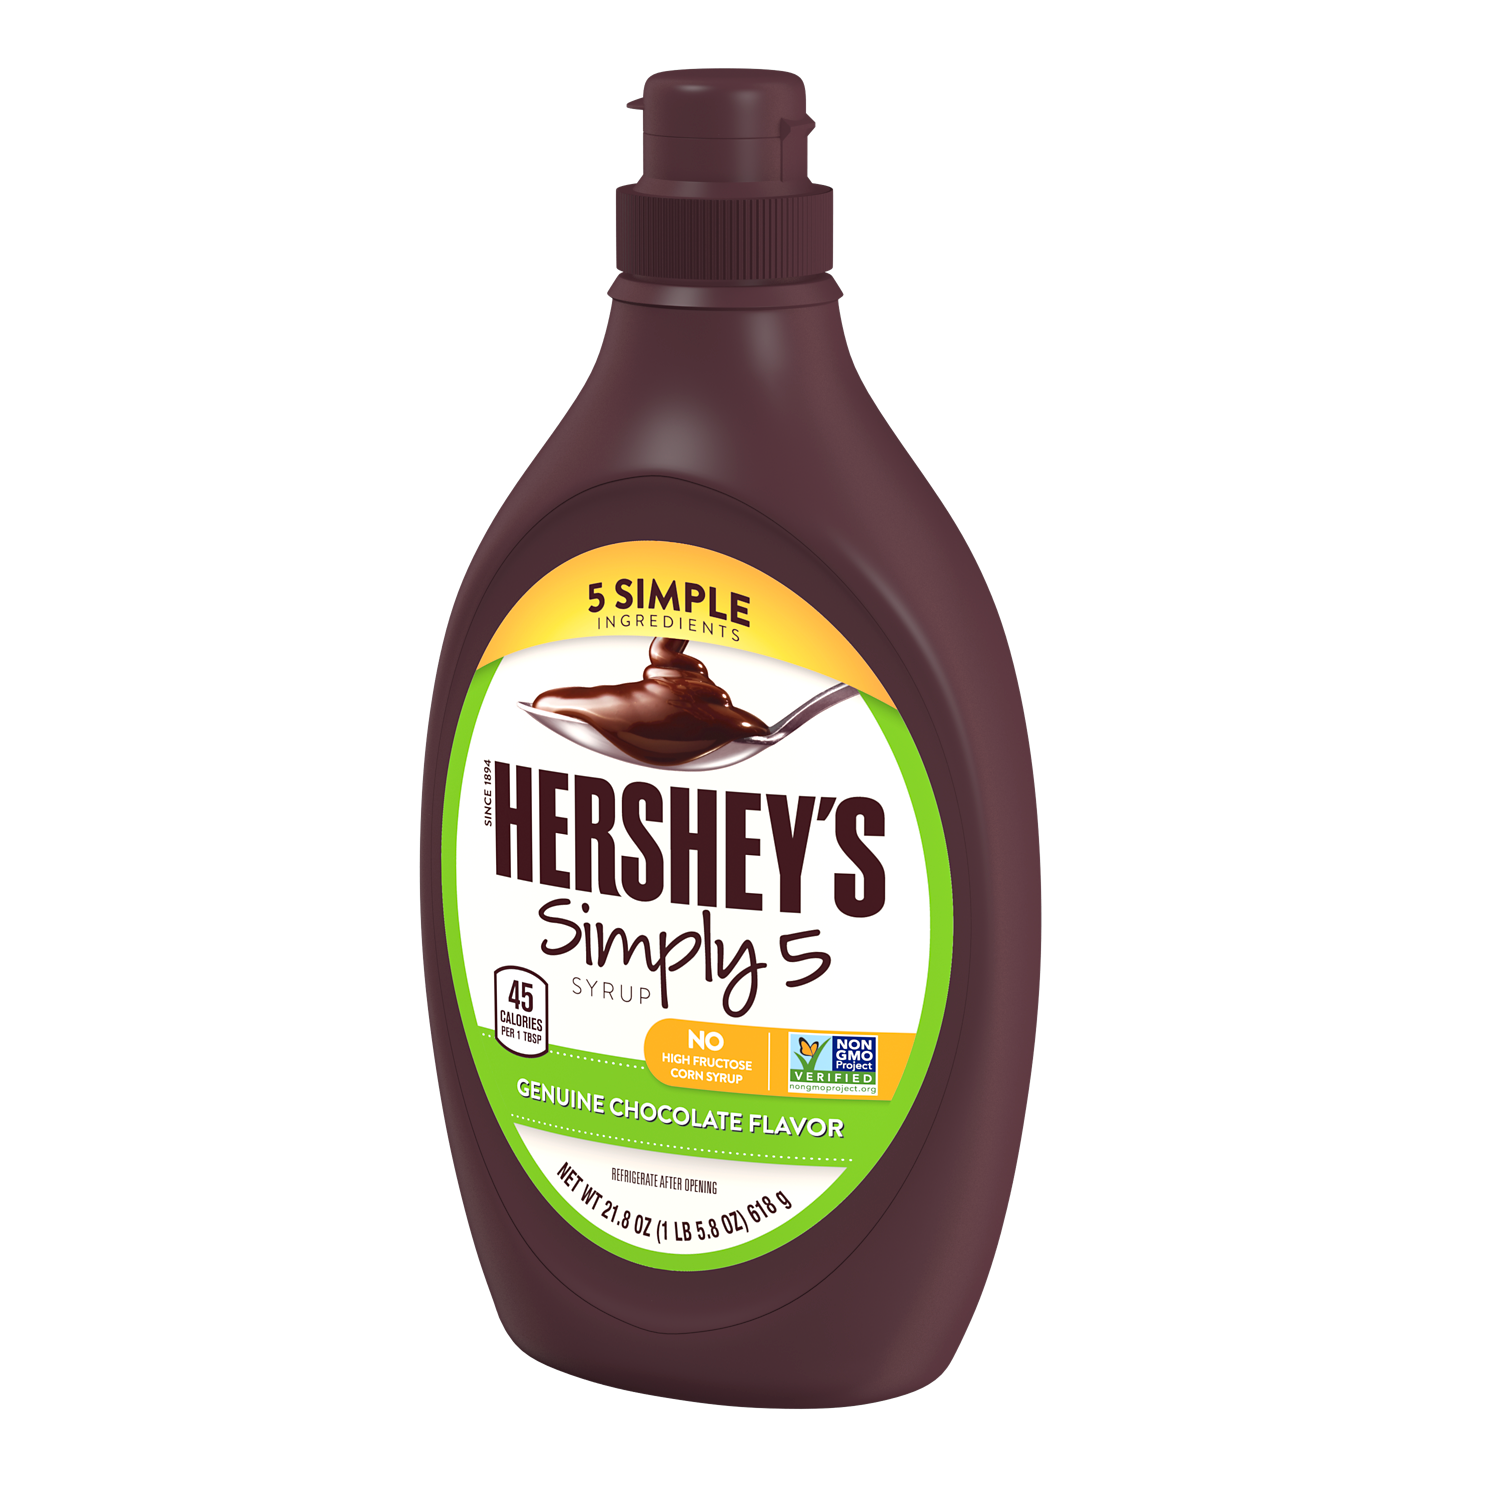 HERSHEY'S Simply 5 Chocolate Syrup, 21.8 oz bottle - Right Side of Package